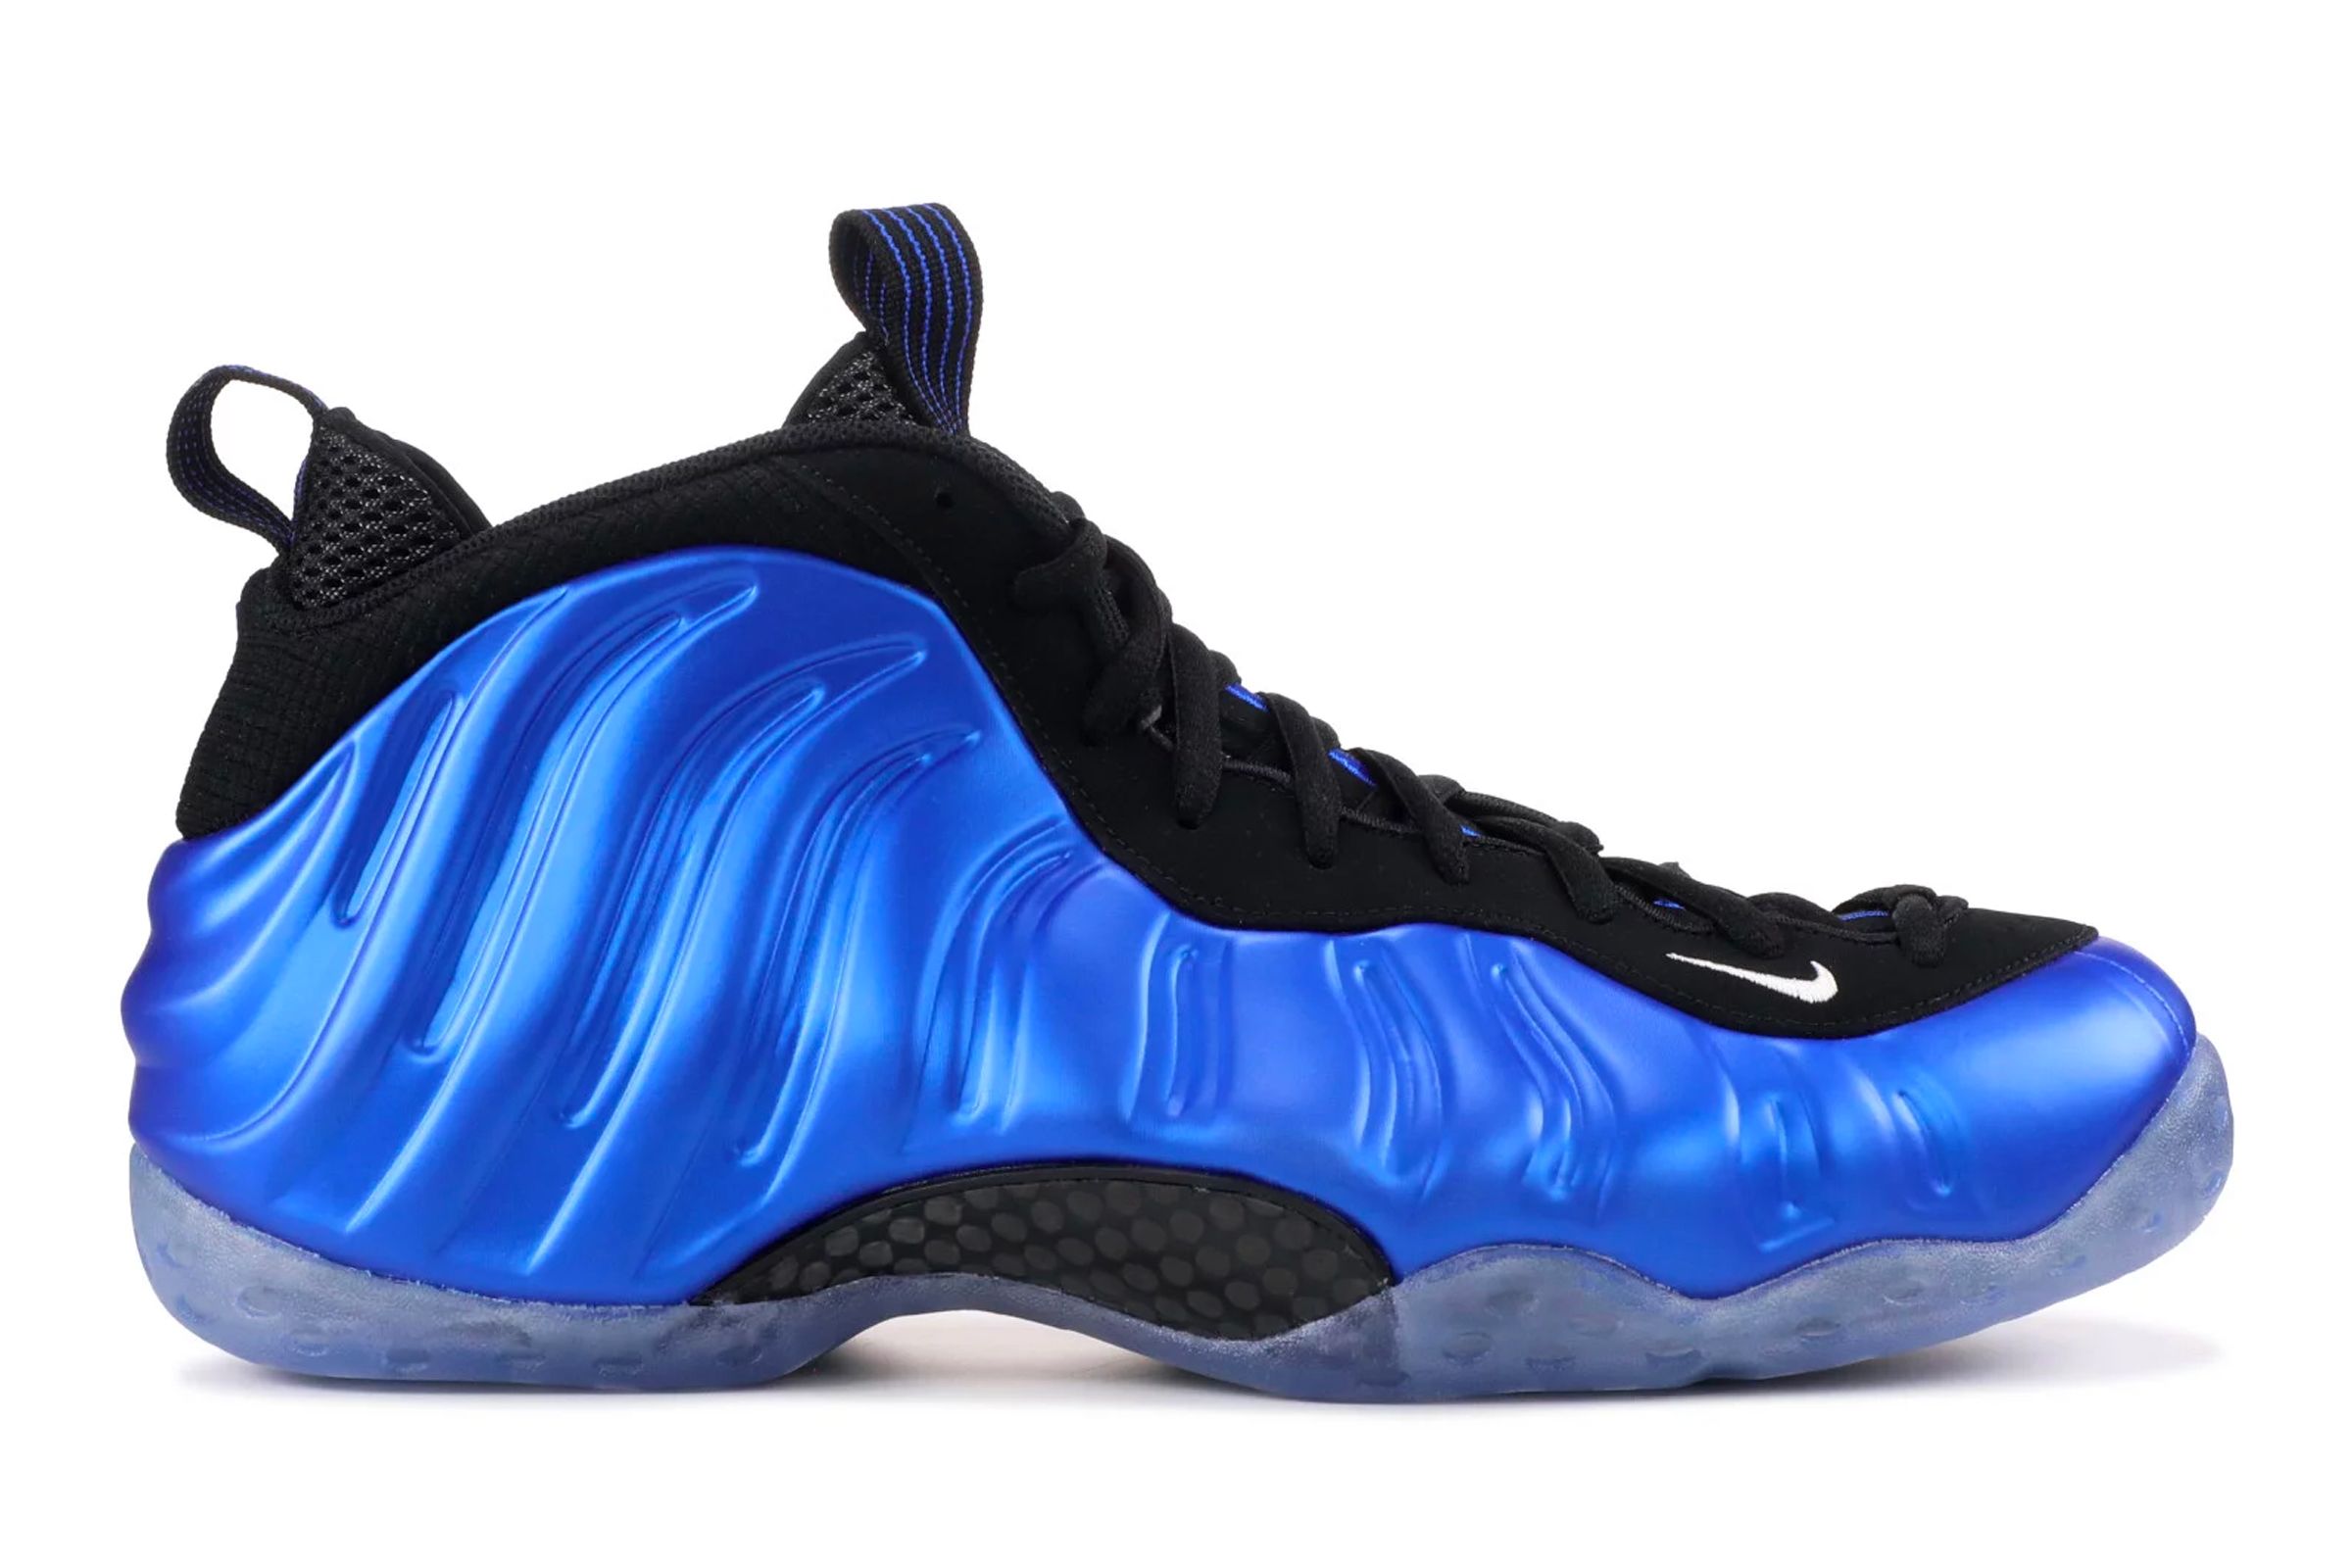 This Nike Foamposite Releases Next Weekend